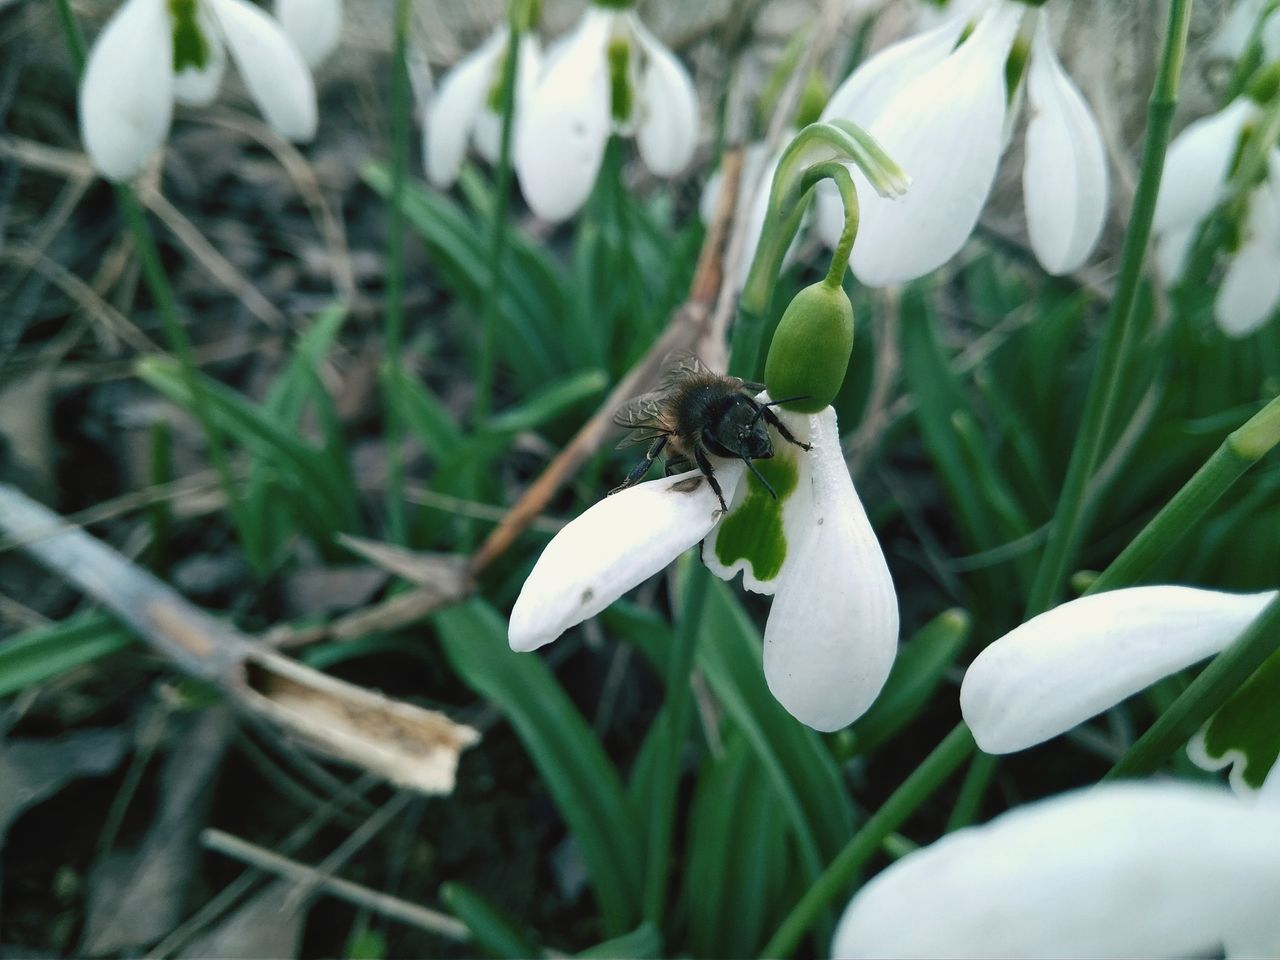 growth, nature, insect, white color, fragility, animal themes, one animal, animals in the wild, plant, freshness, beauty in nature, no people, day, green color, outdoors, close-up, flower, leaf, snowdrop